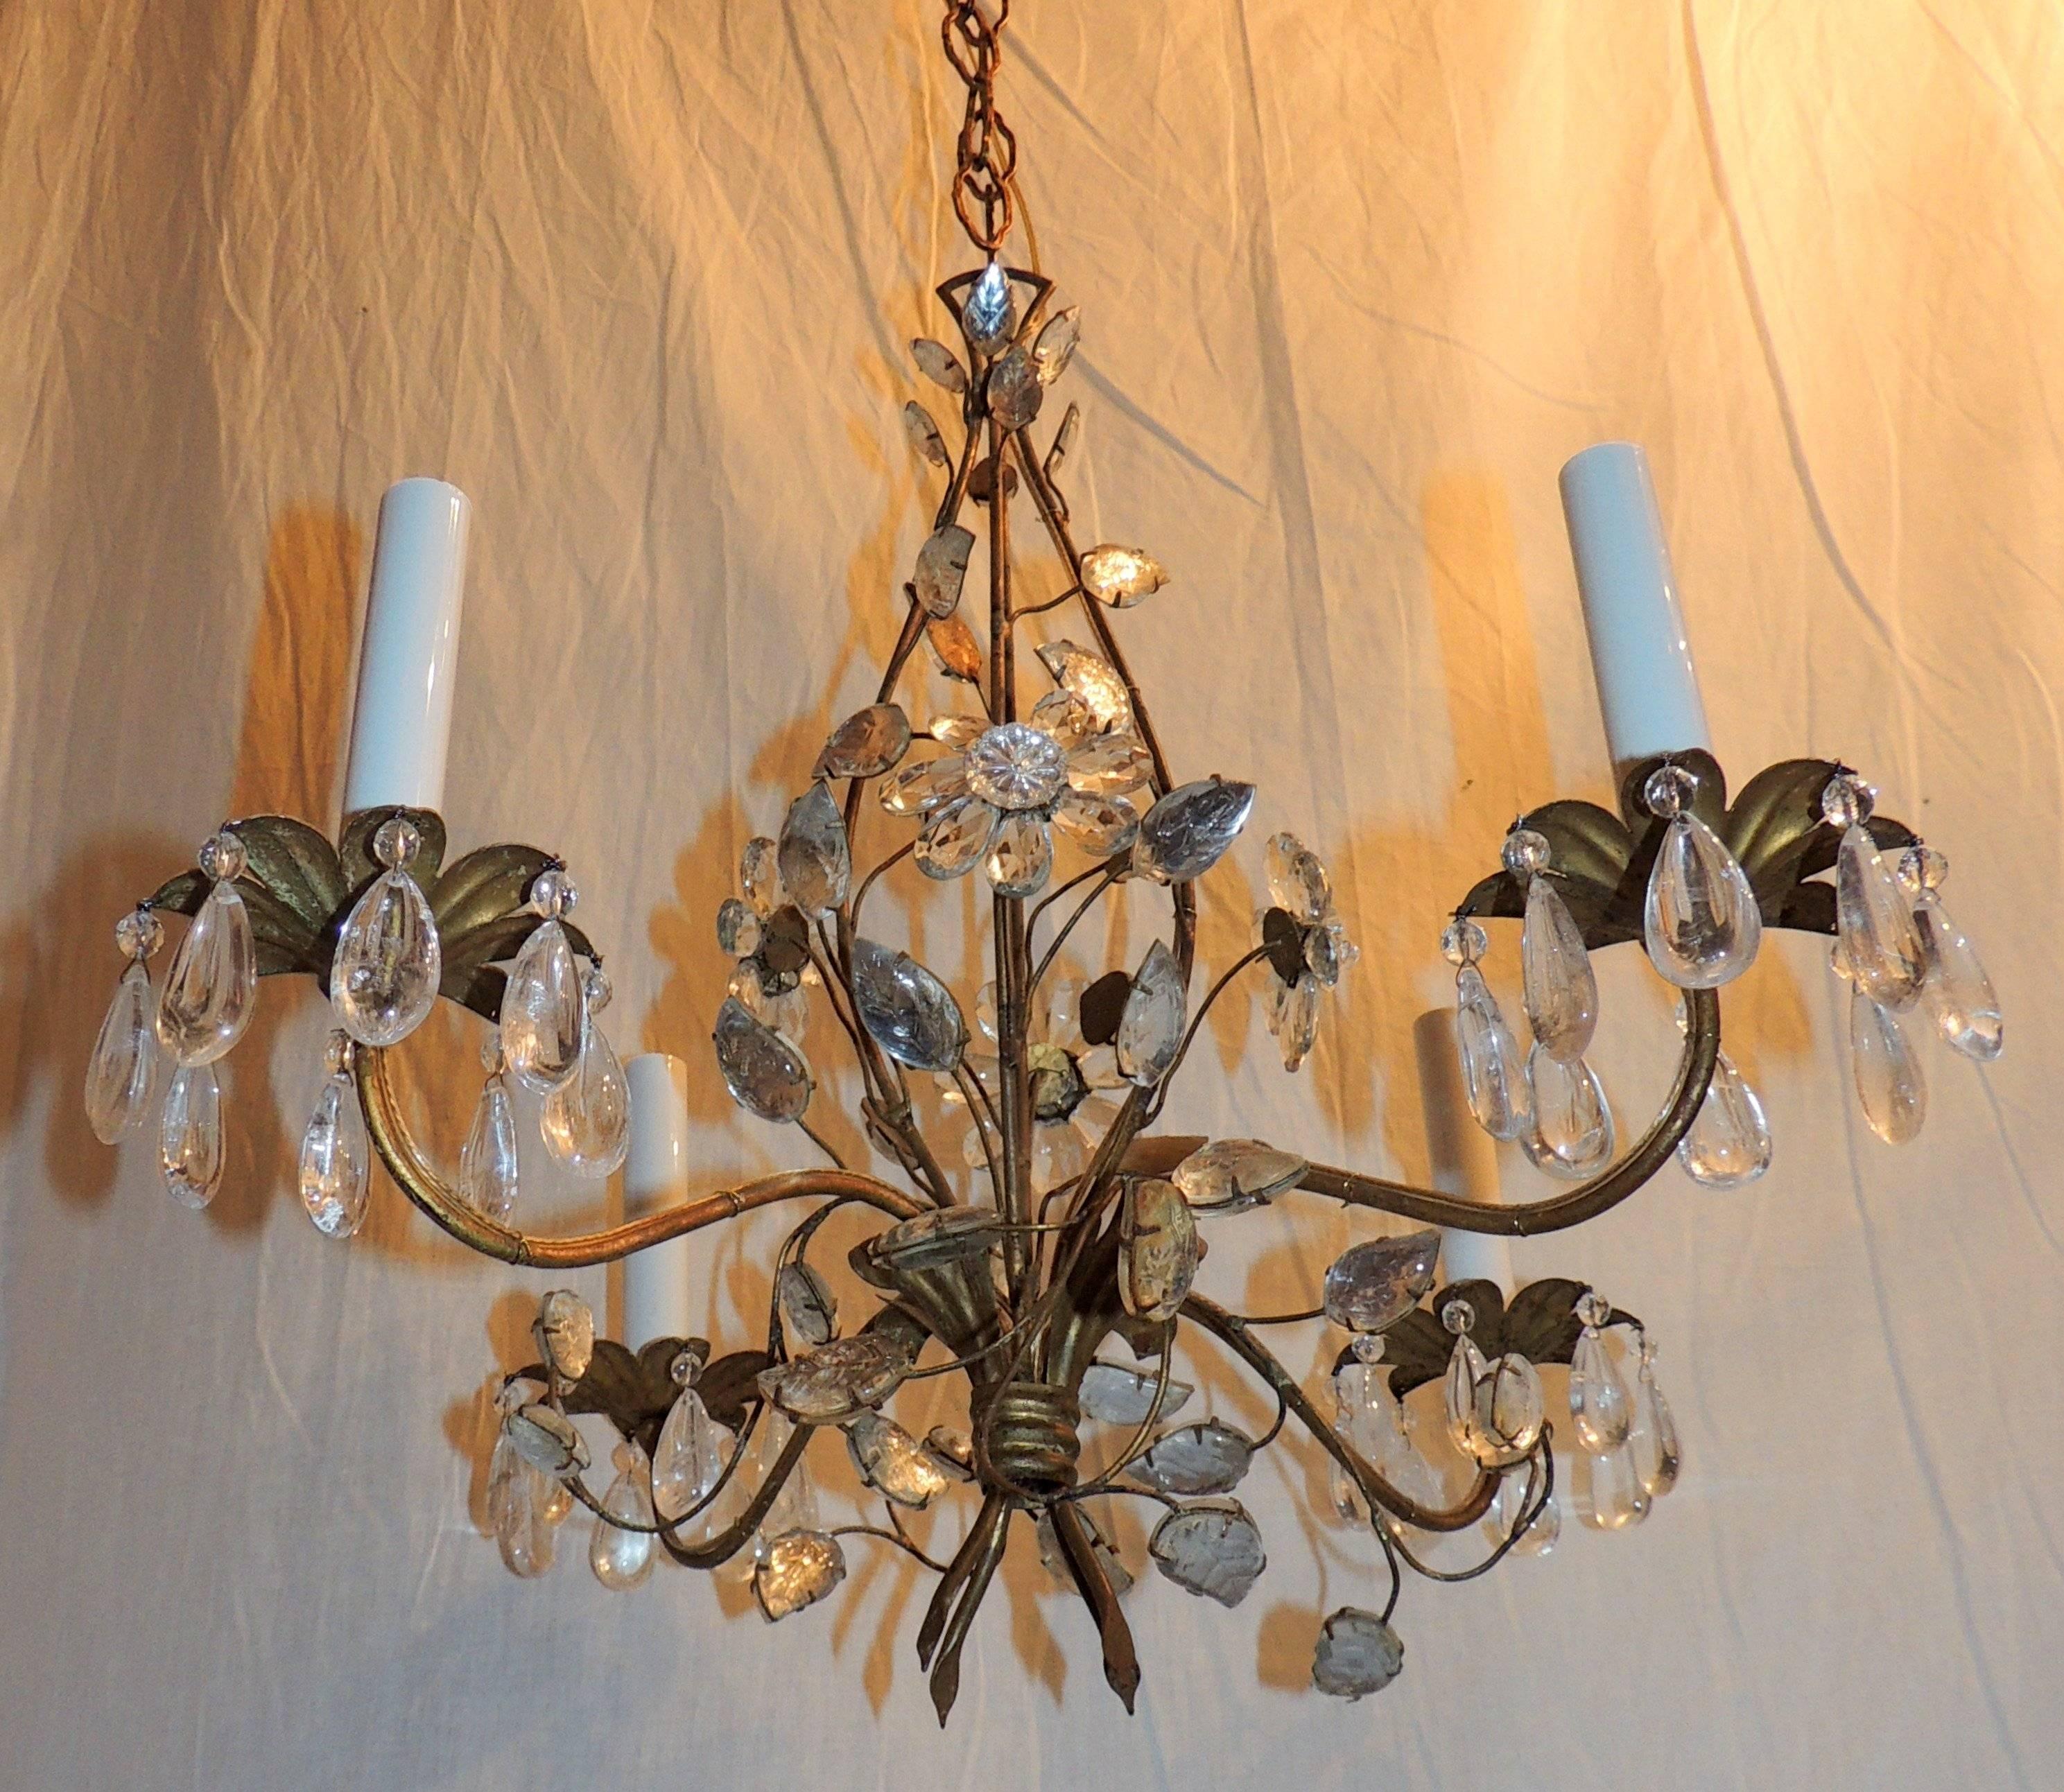 Wonderful Bagues six-light rock floral crystal gilt bronze transitional chandelier with delicate leaves and flowers entwined throughout.

Measures: 16" W x 22" H.